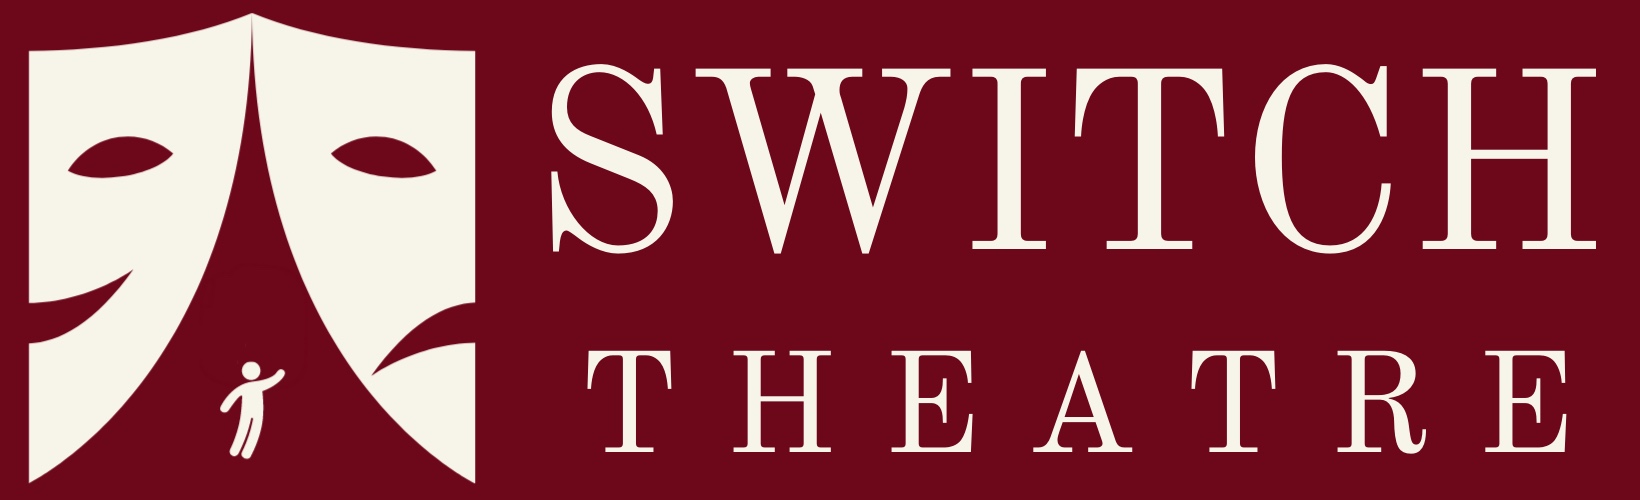 The Switch Theatre